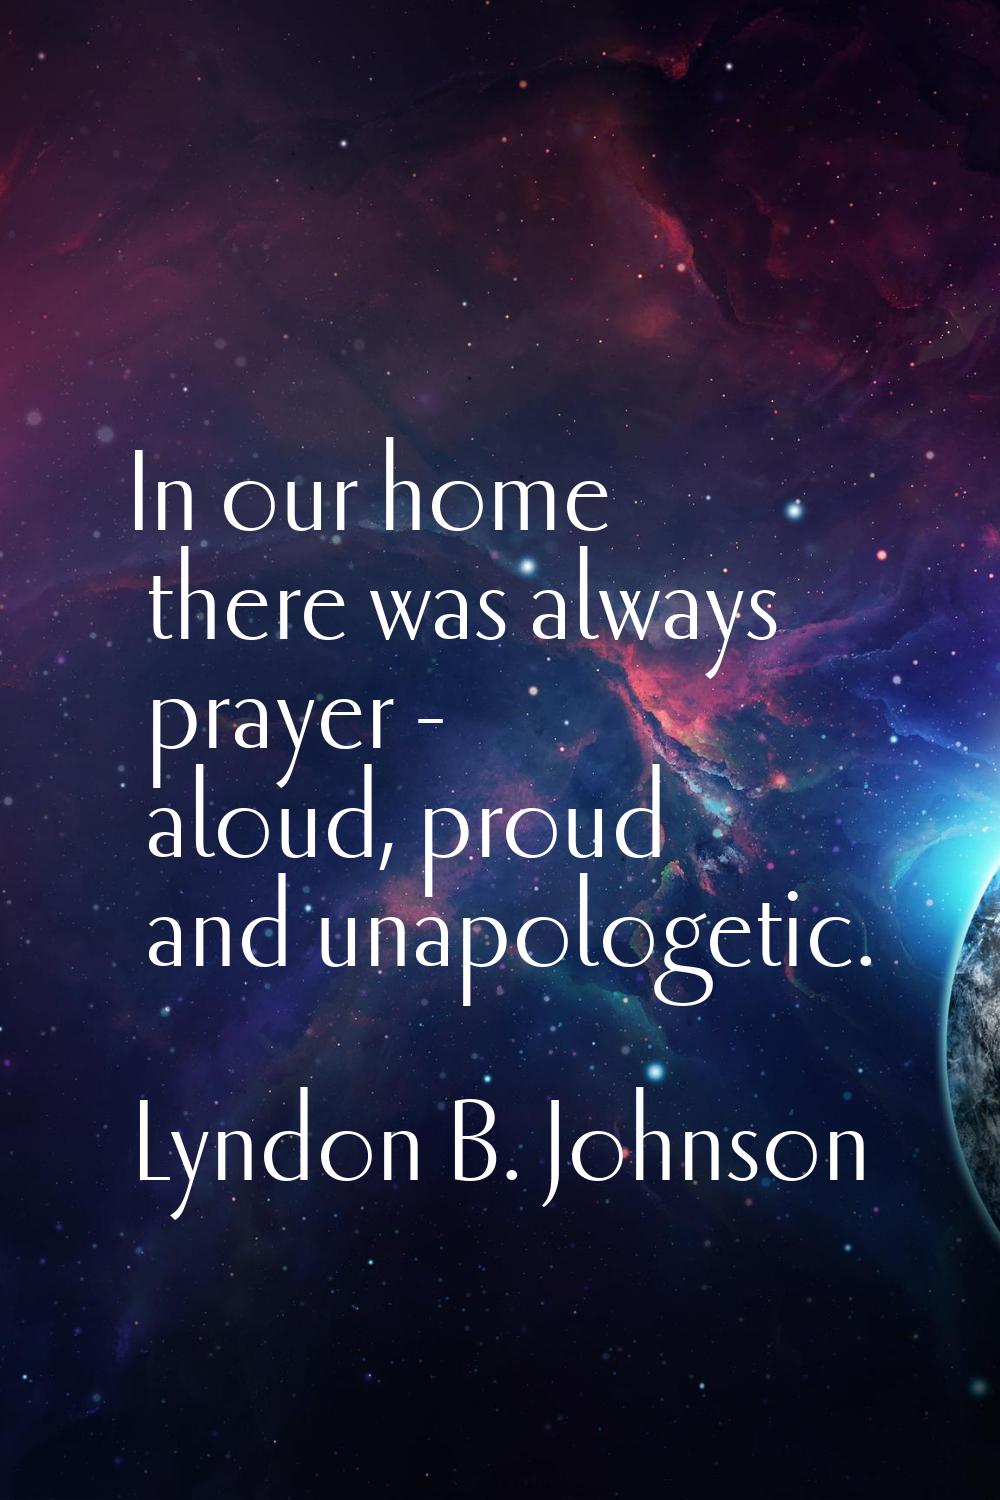 In our home there was always prayer - aloud, proud and unapologetic.